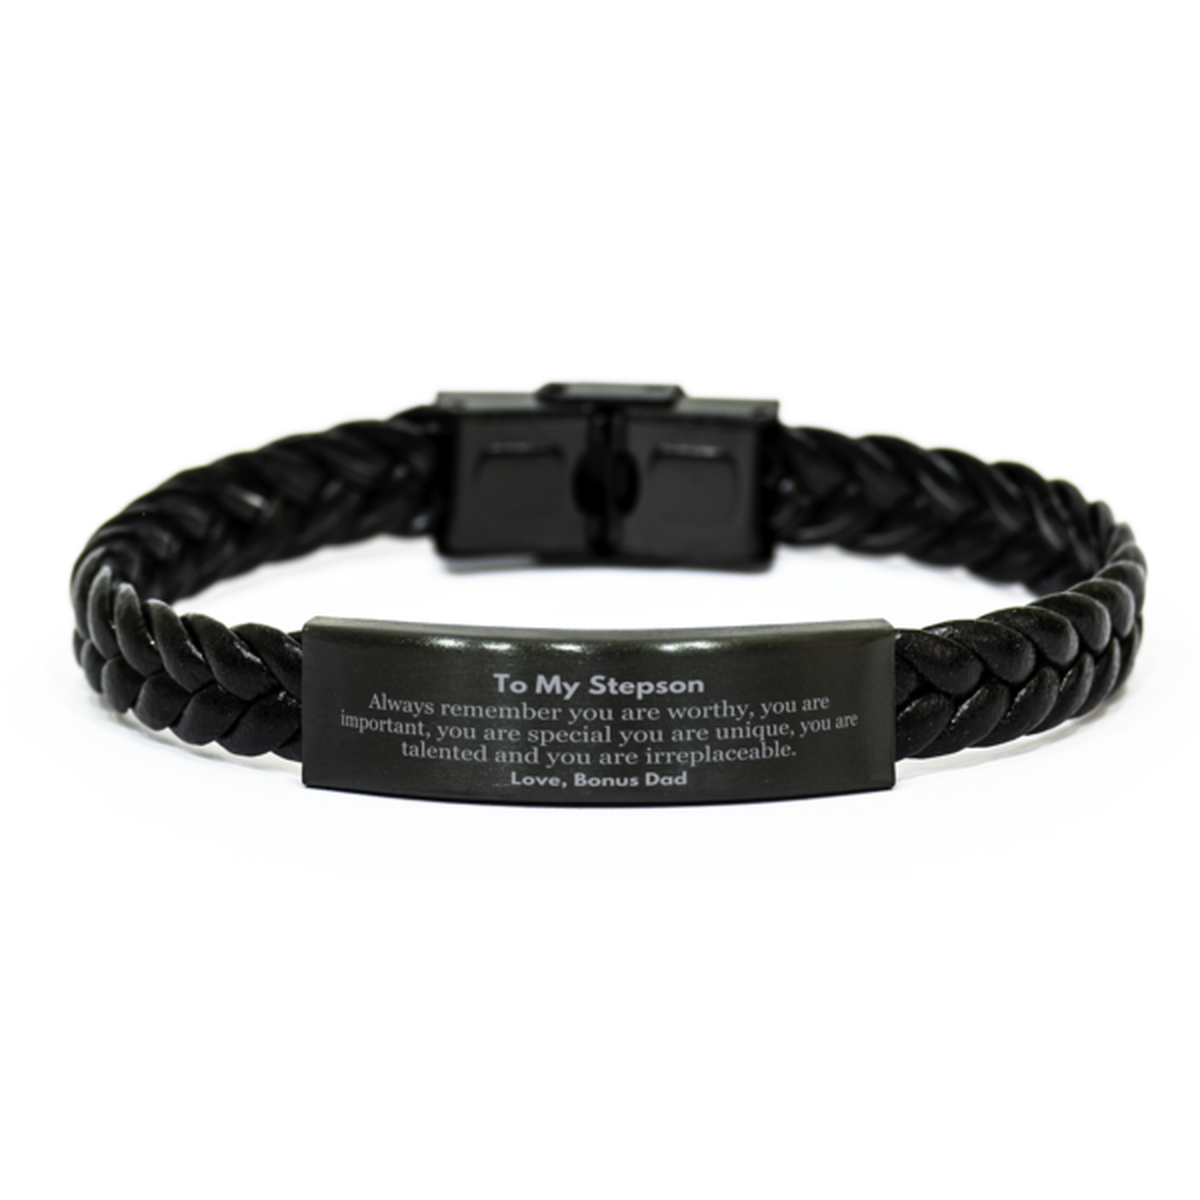 Stepson Birthday Gifts from Bonus Dad, Inspirational Braided Leather Bracelet for Stepson Christmas Graduation Gifts for Stepson Always remember you are worthy, you are important. Love, Bonus Dad